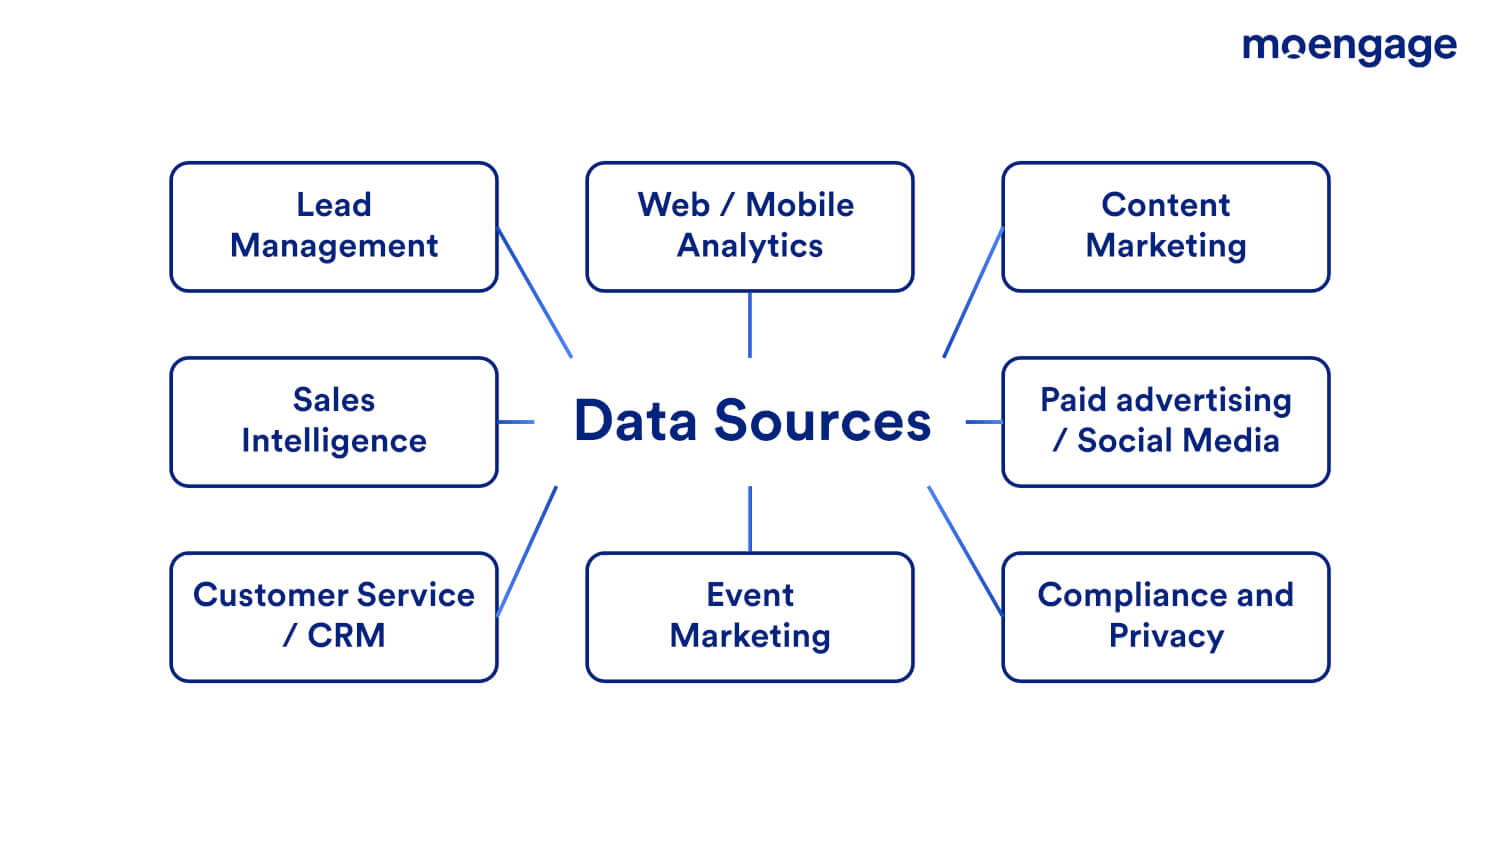 This image shows some sources for collecting customer data